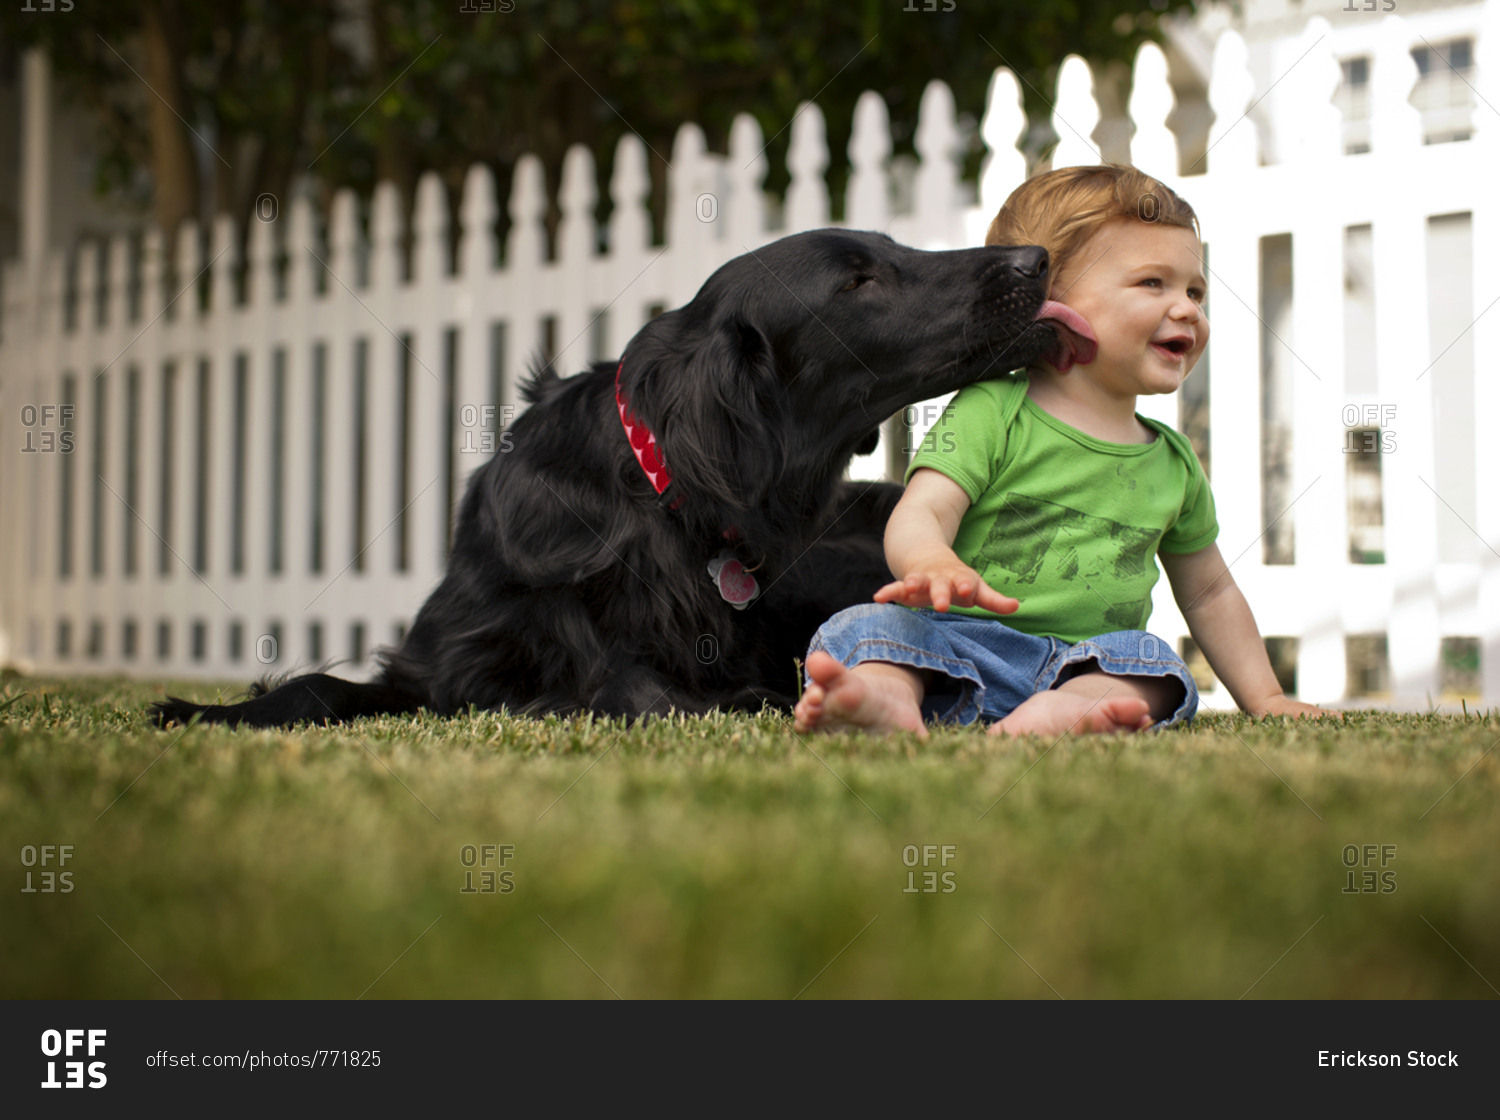 Smiling baby boy sitting in back yard with pet dog.